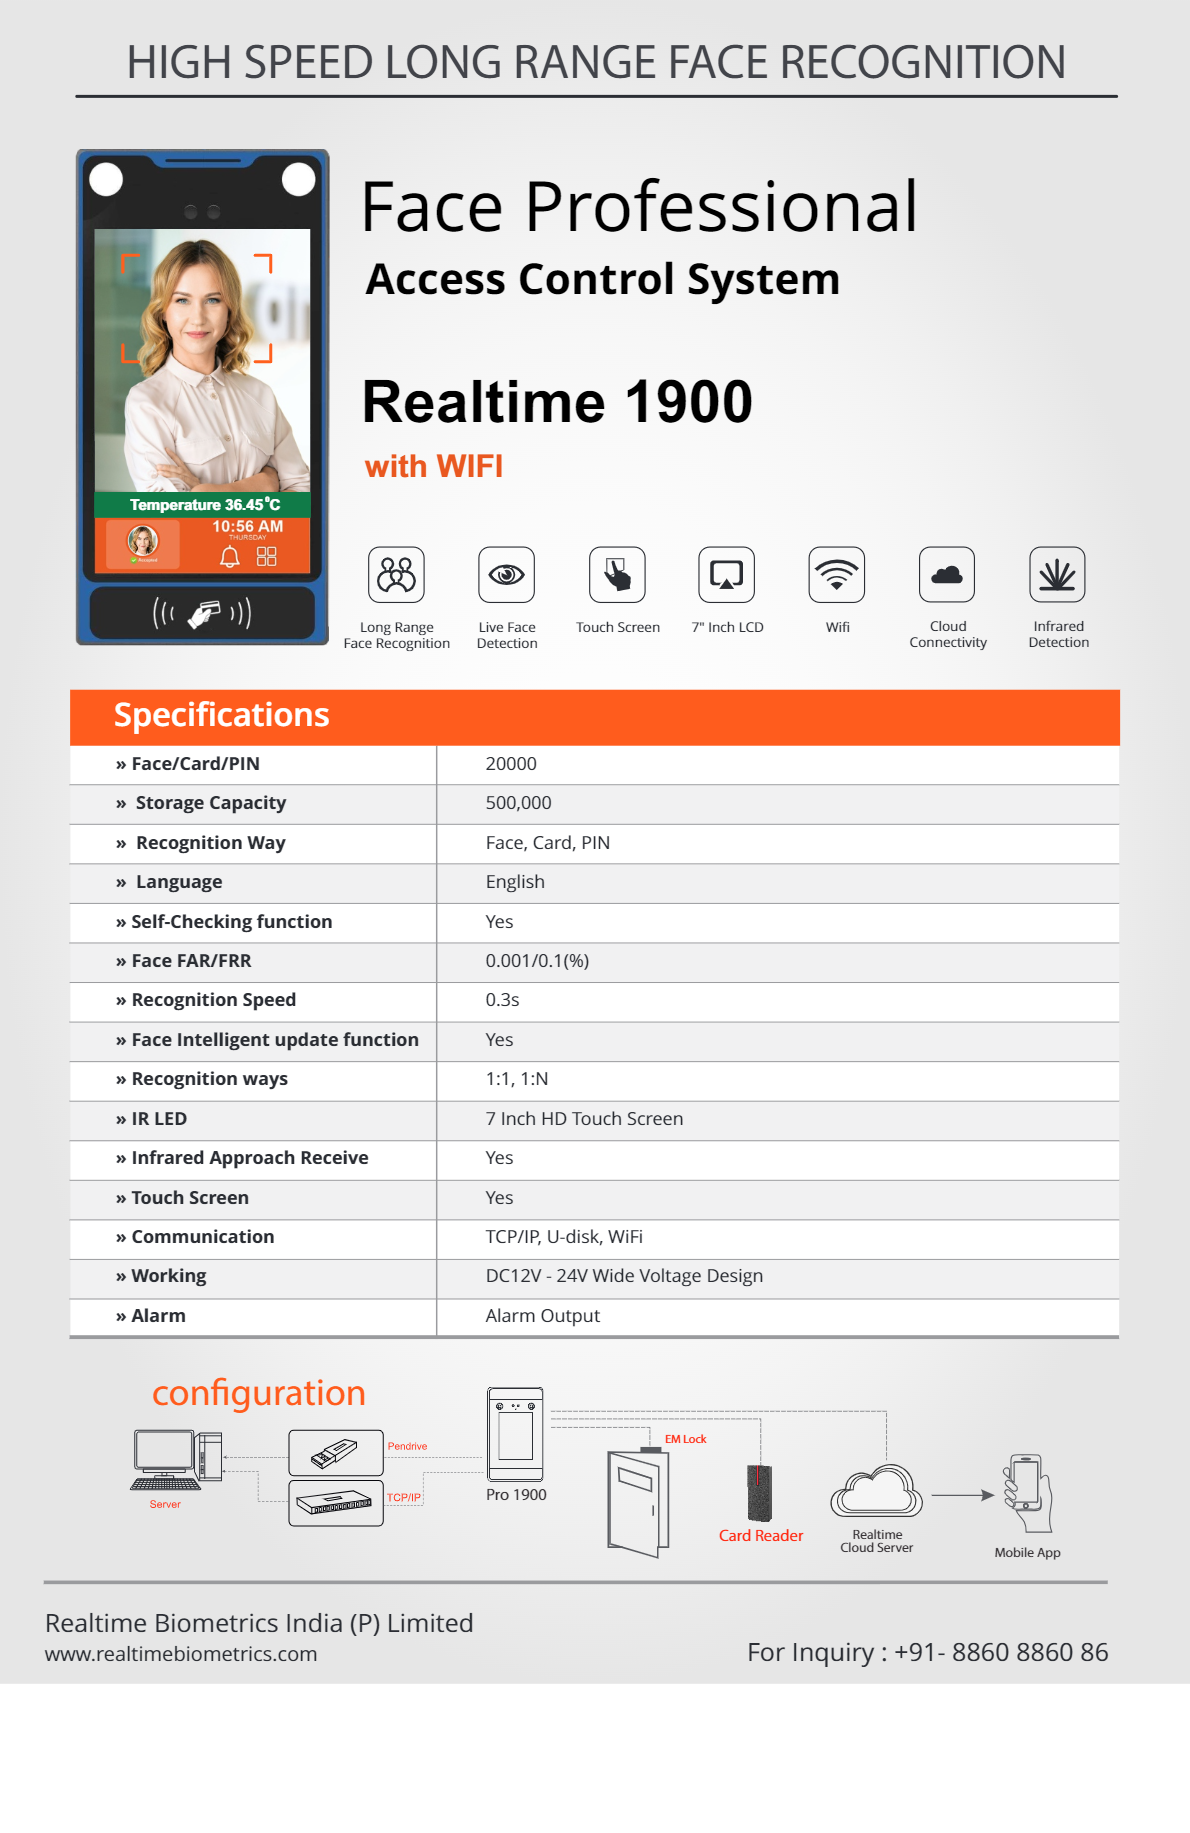 Realtime Pro 1900 Face Professional Access Control System